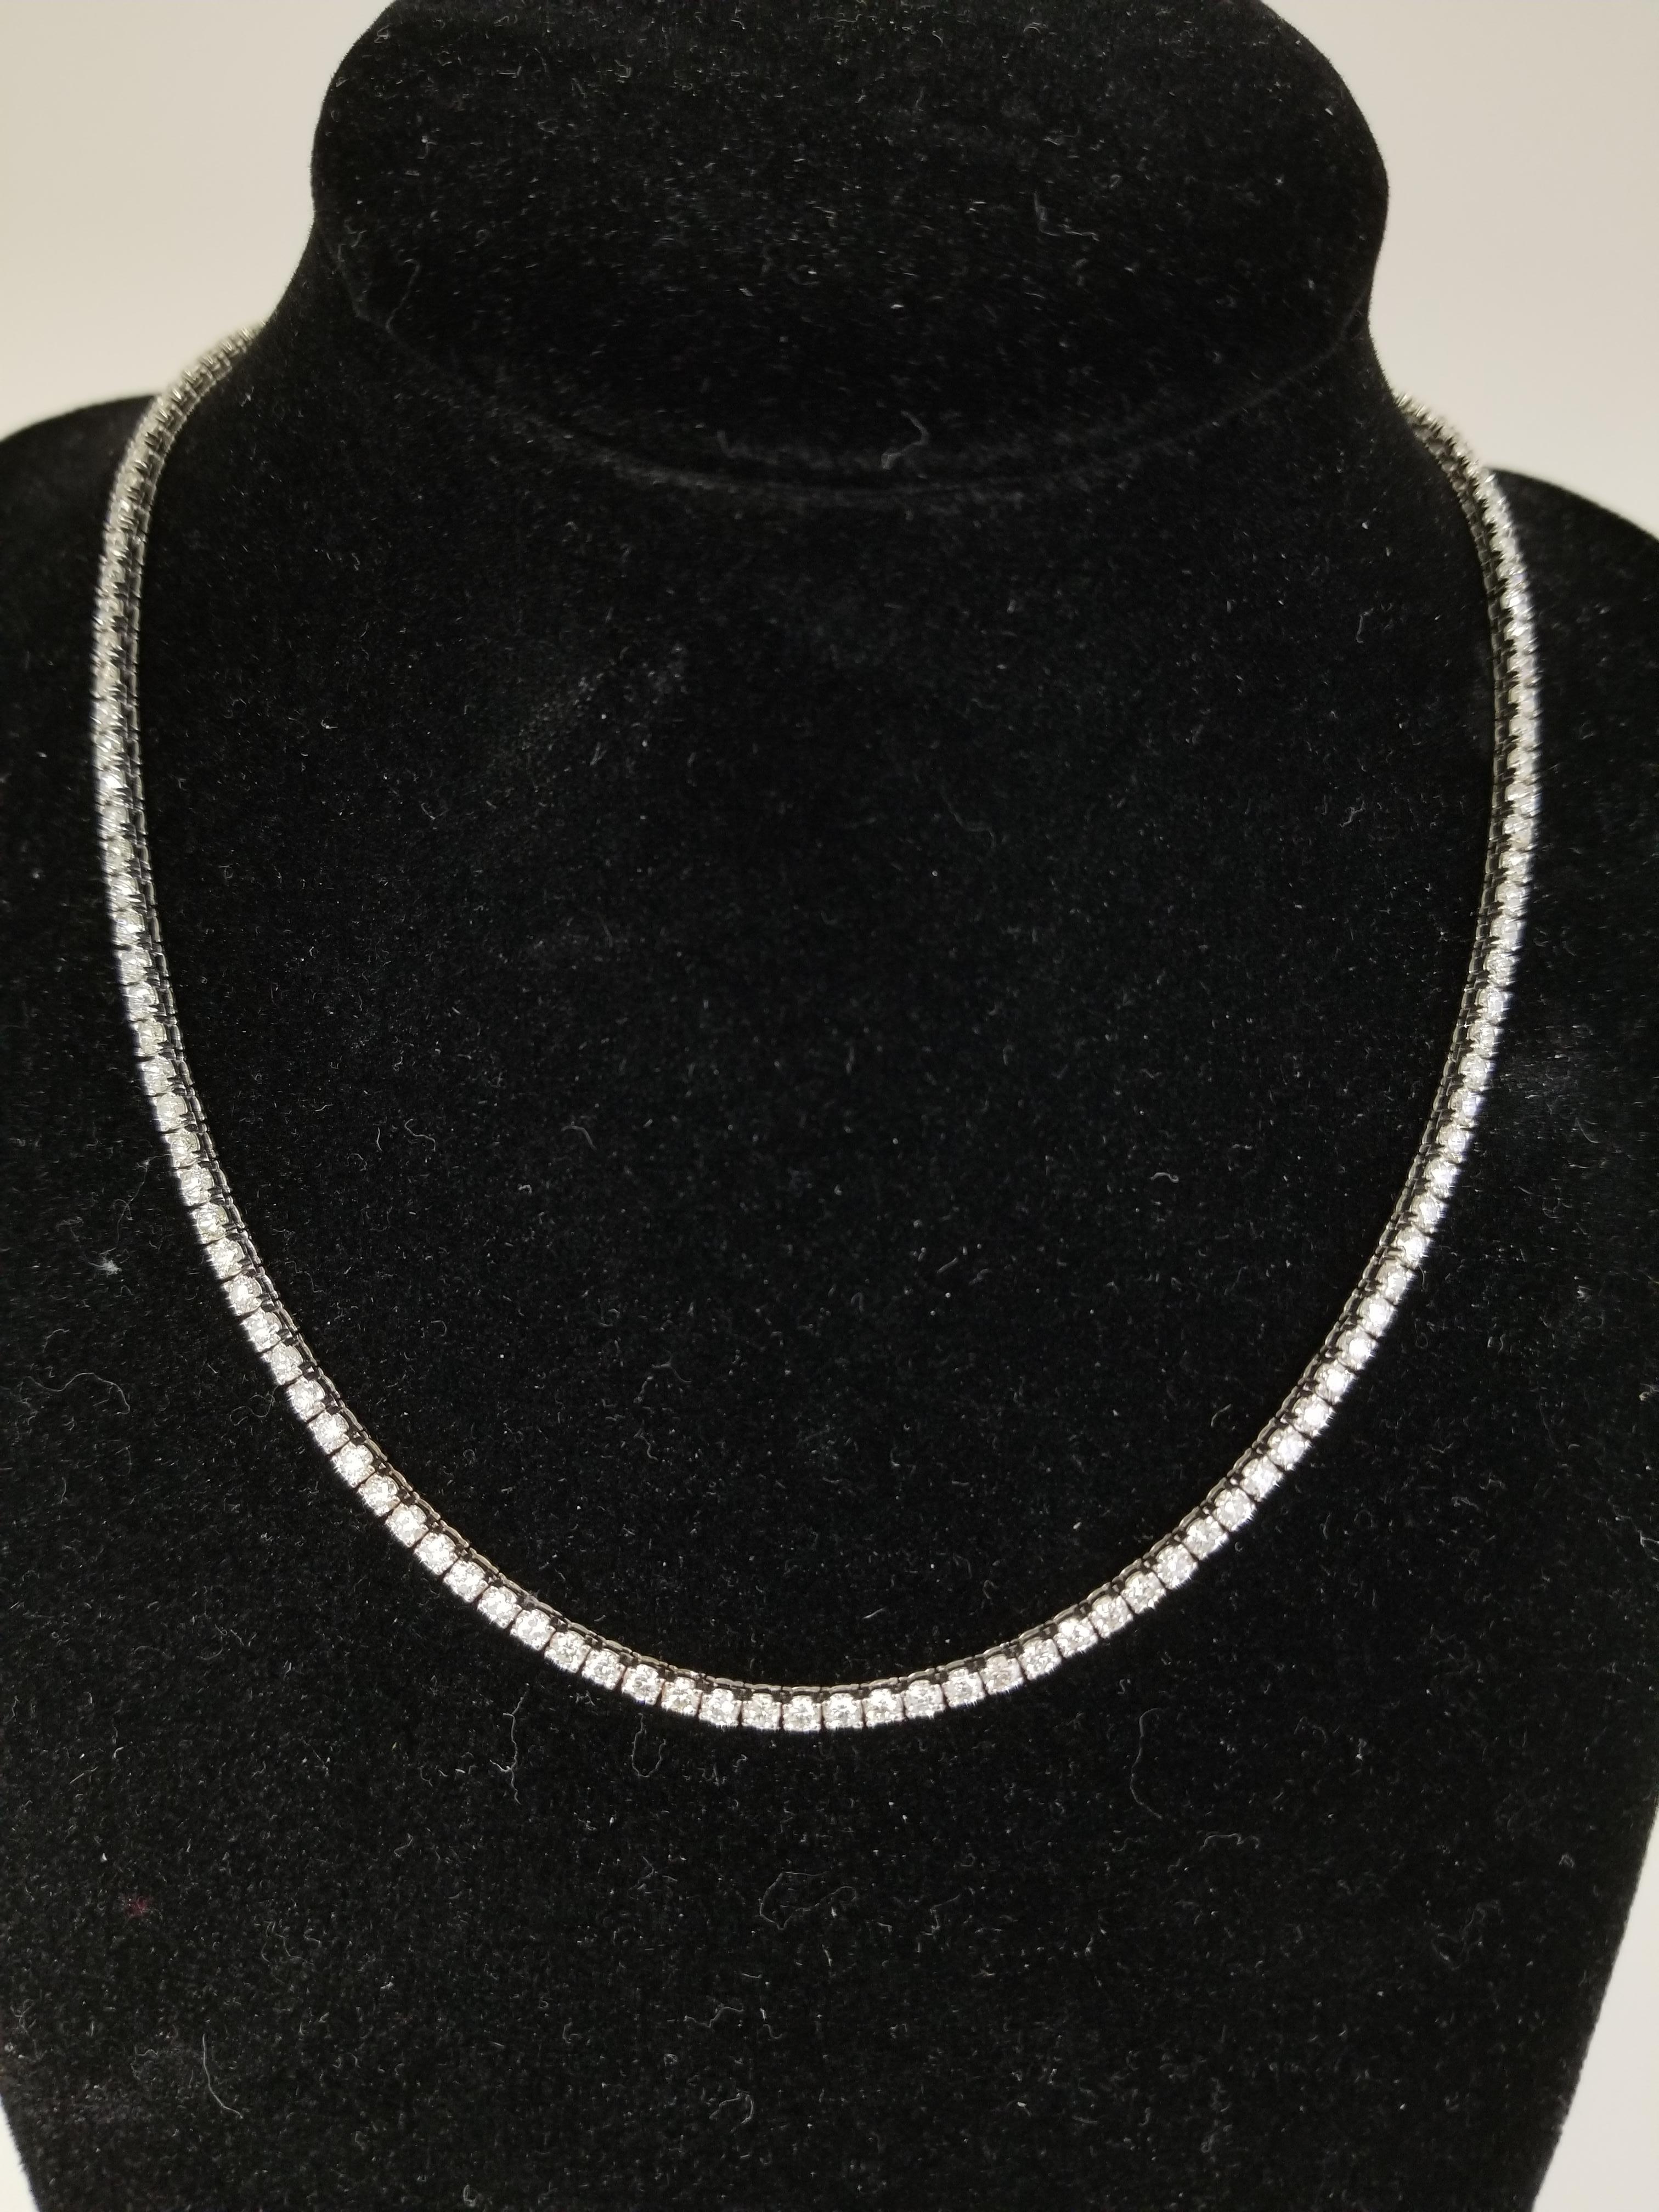 Great quality tennis necklace, round-brilliant cut white diamonds clean and Excellent shine. 14K white gold classic four-prong style for maximum light brilliance. Exquisite style for every day.

Length 18 inch
Average Color H , Clarity VS
2.6 MM